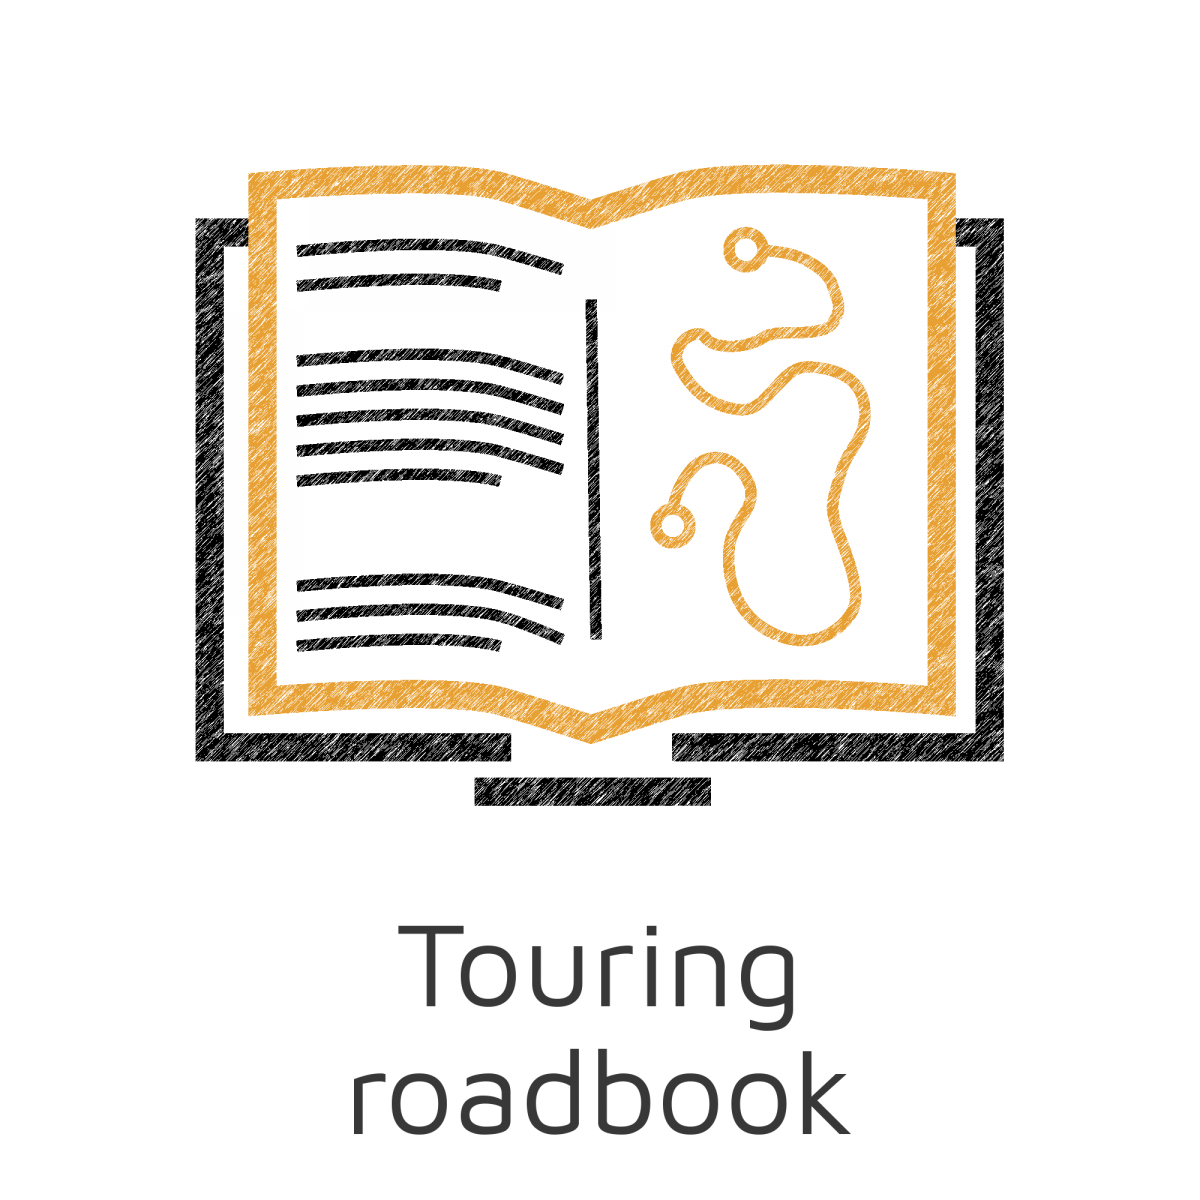 Keeping your motorbike tours in your memory is easy with the dguard touring roadbook.